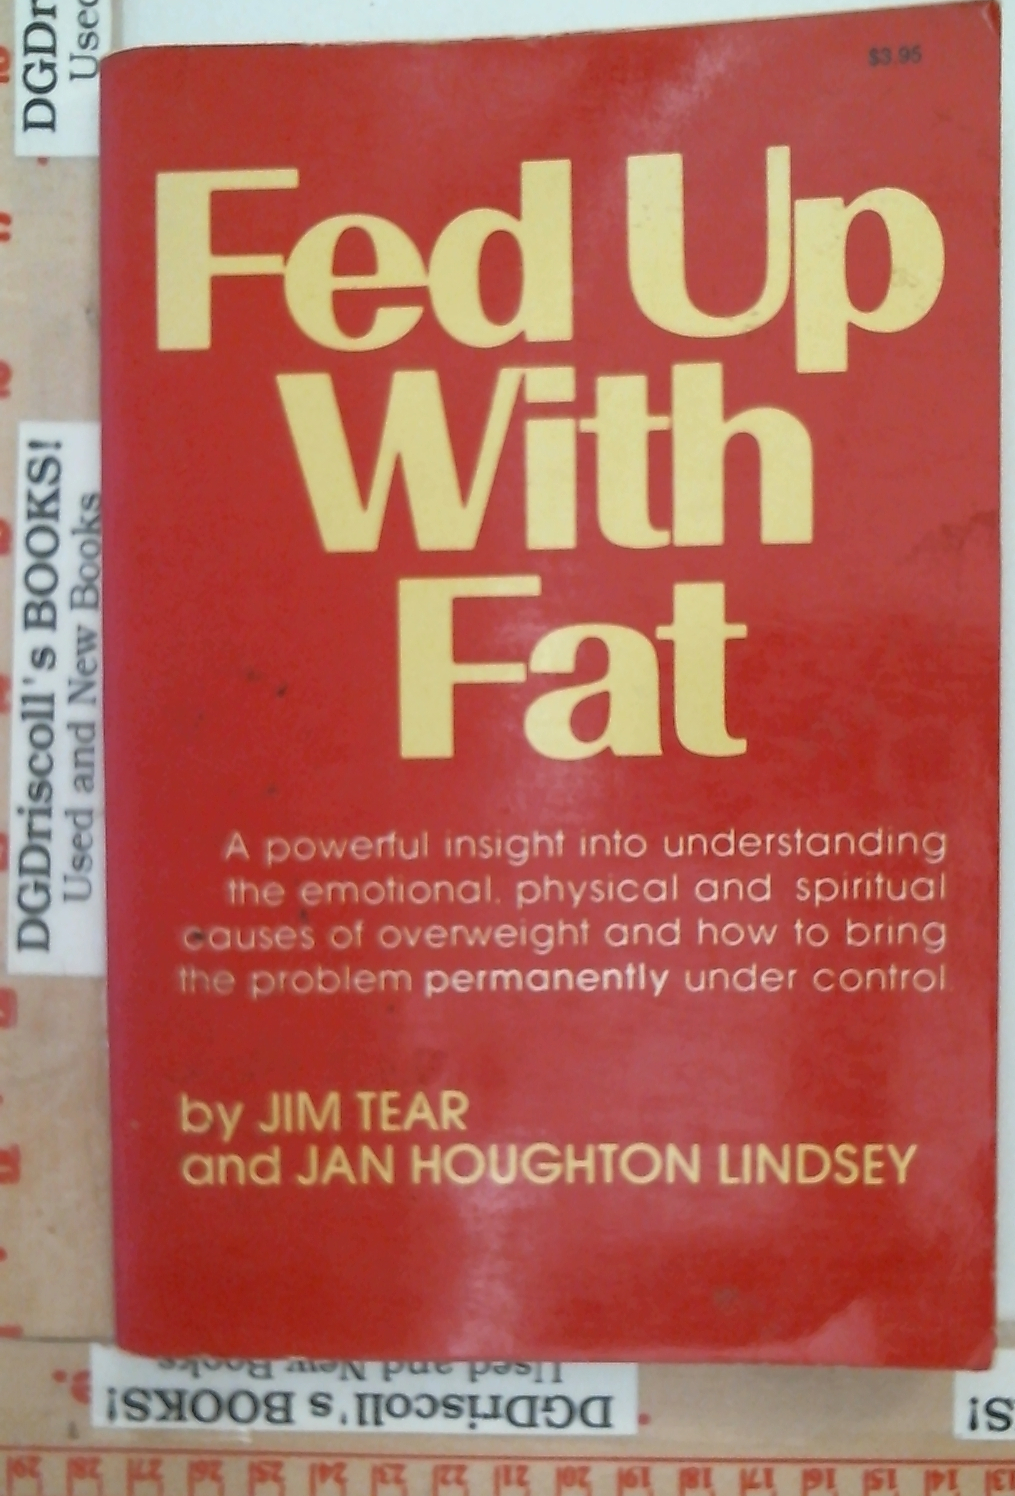 Fed up With Fat